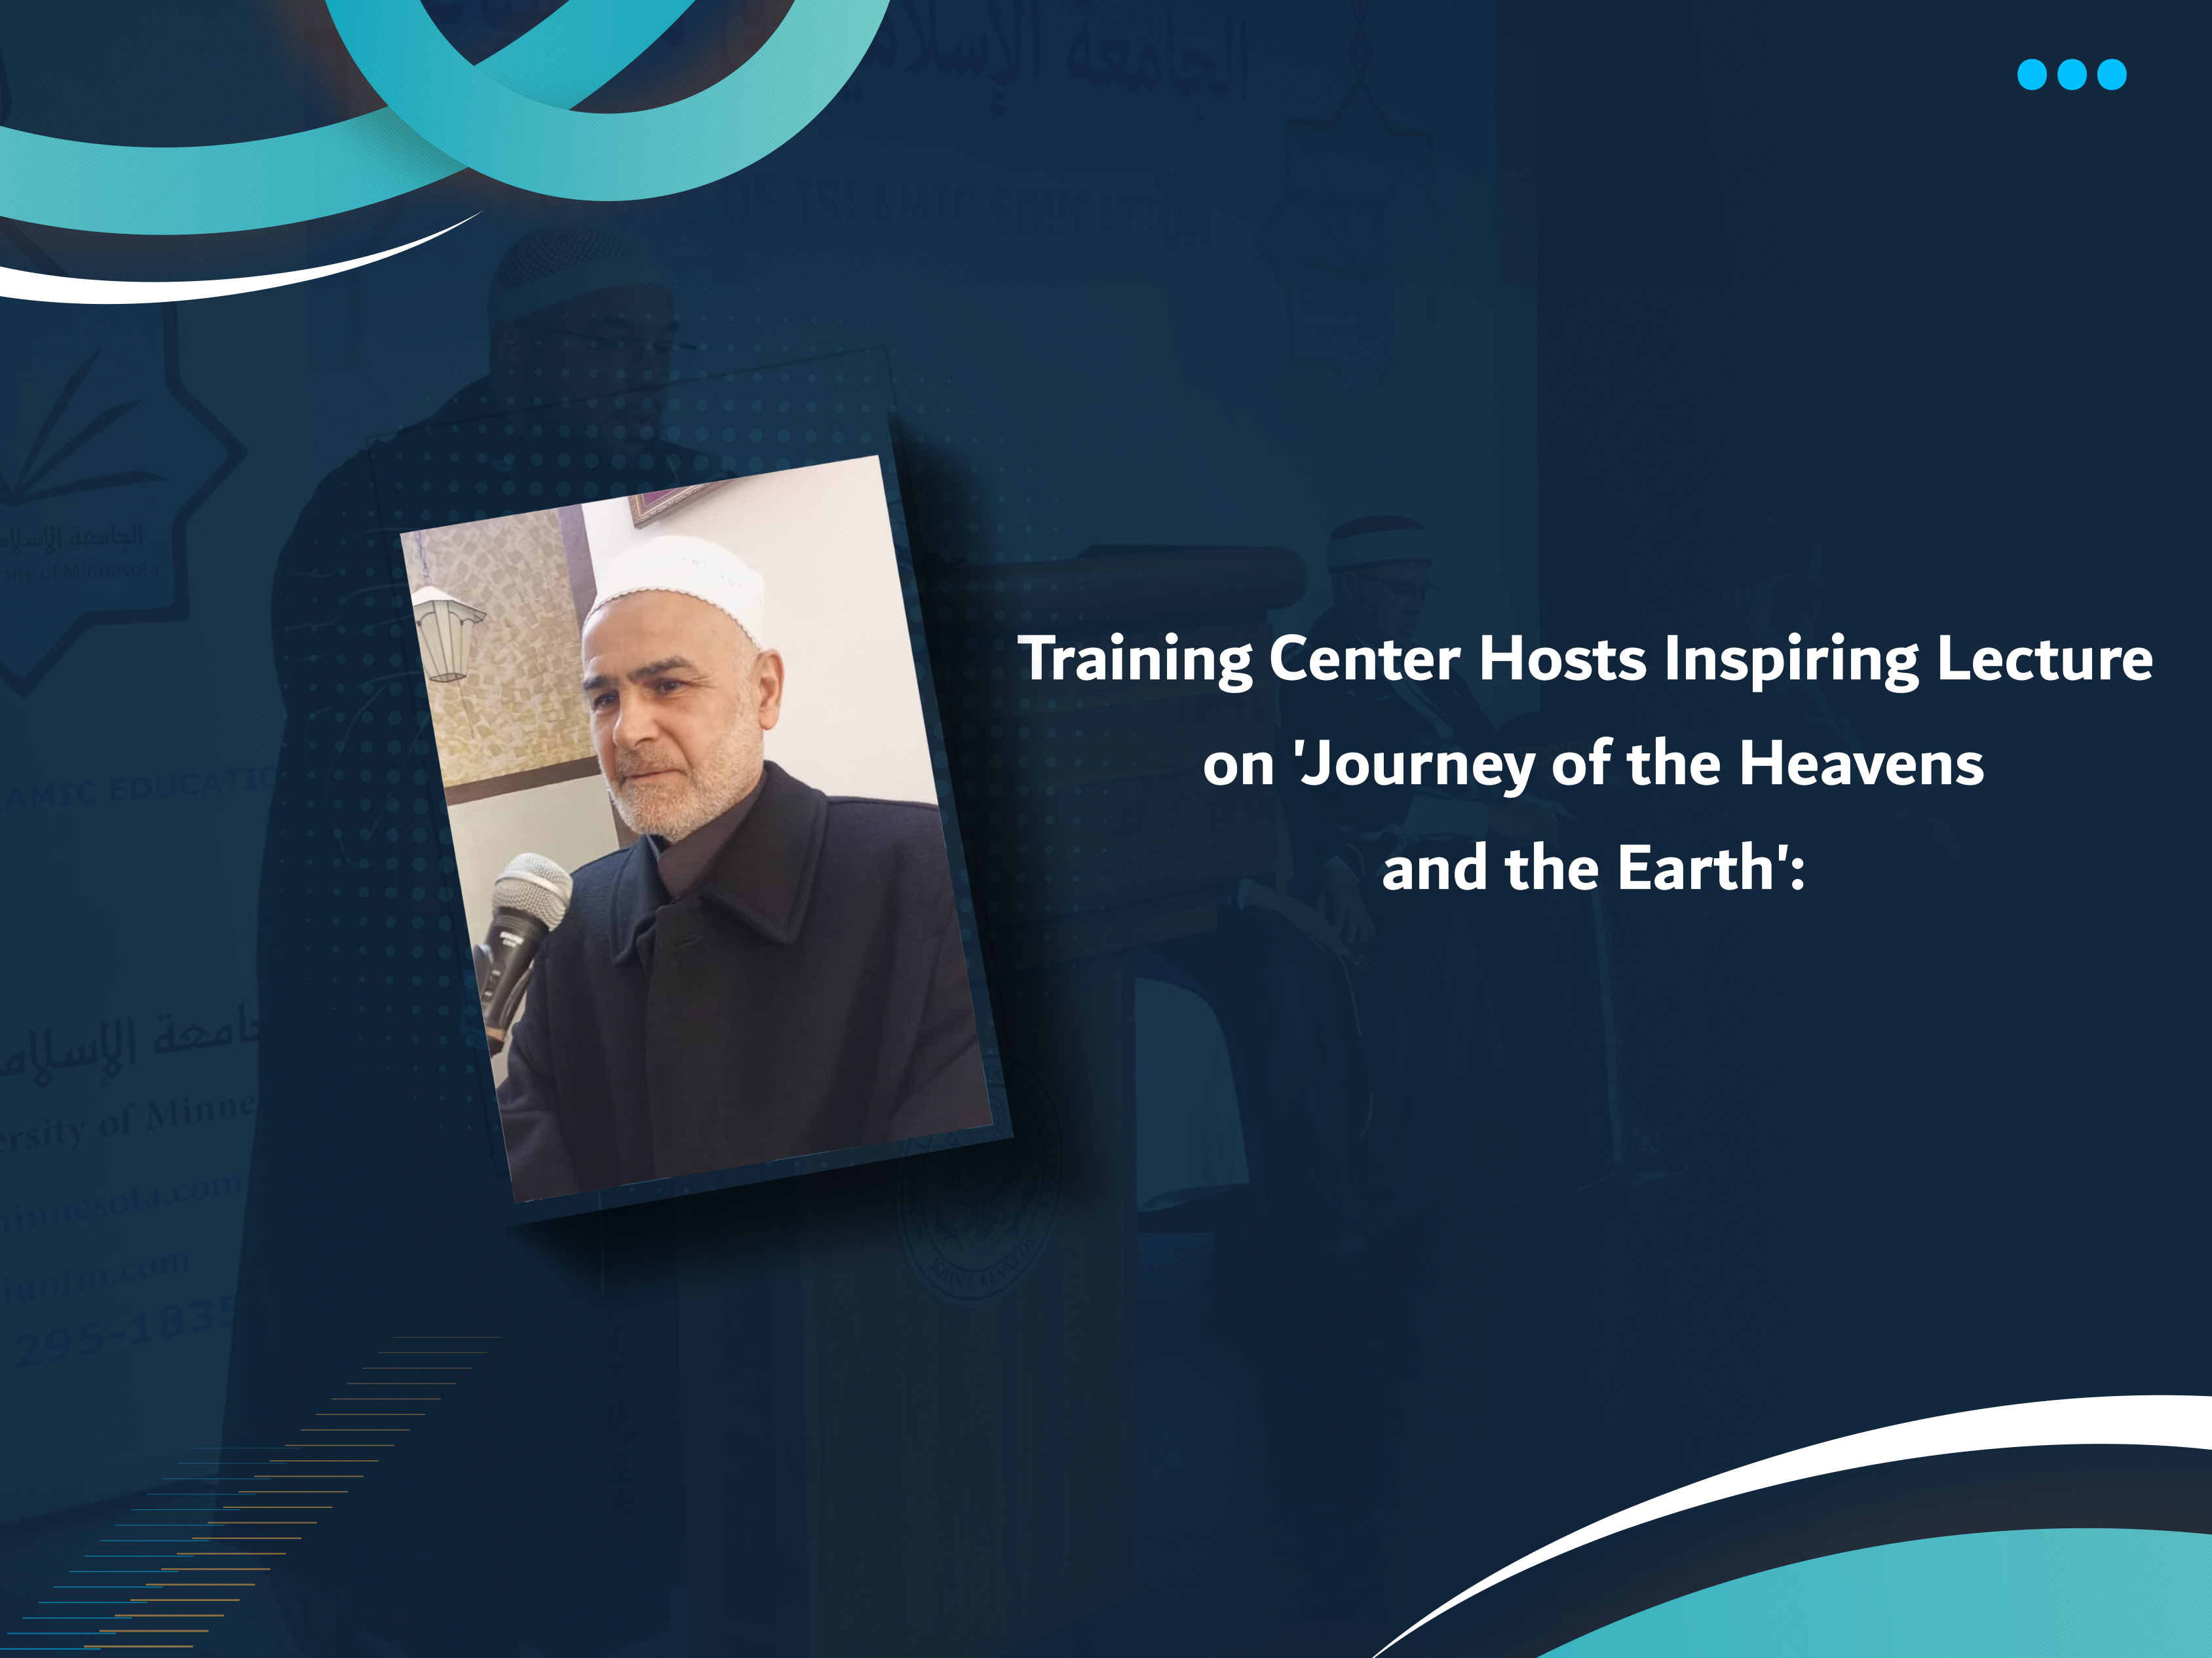 Training Center Hosts Inspiring Lecture on 'Journey of the Heavens and the Earth'